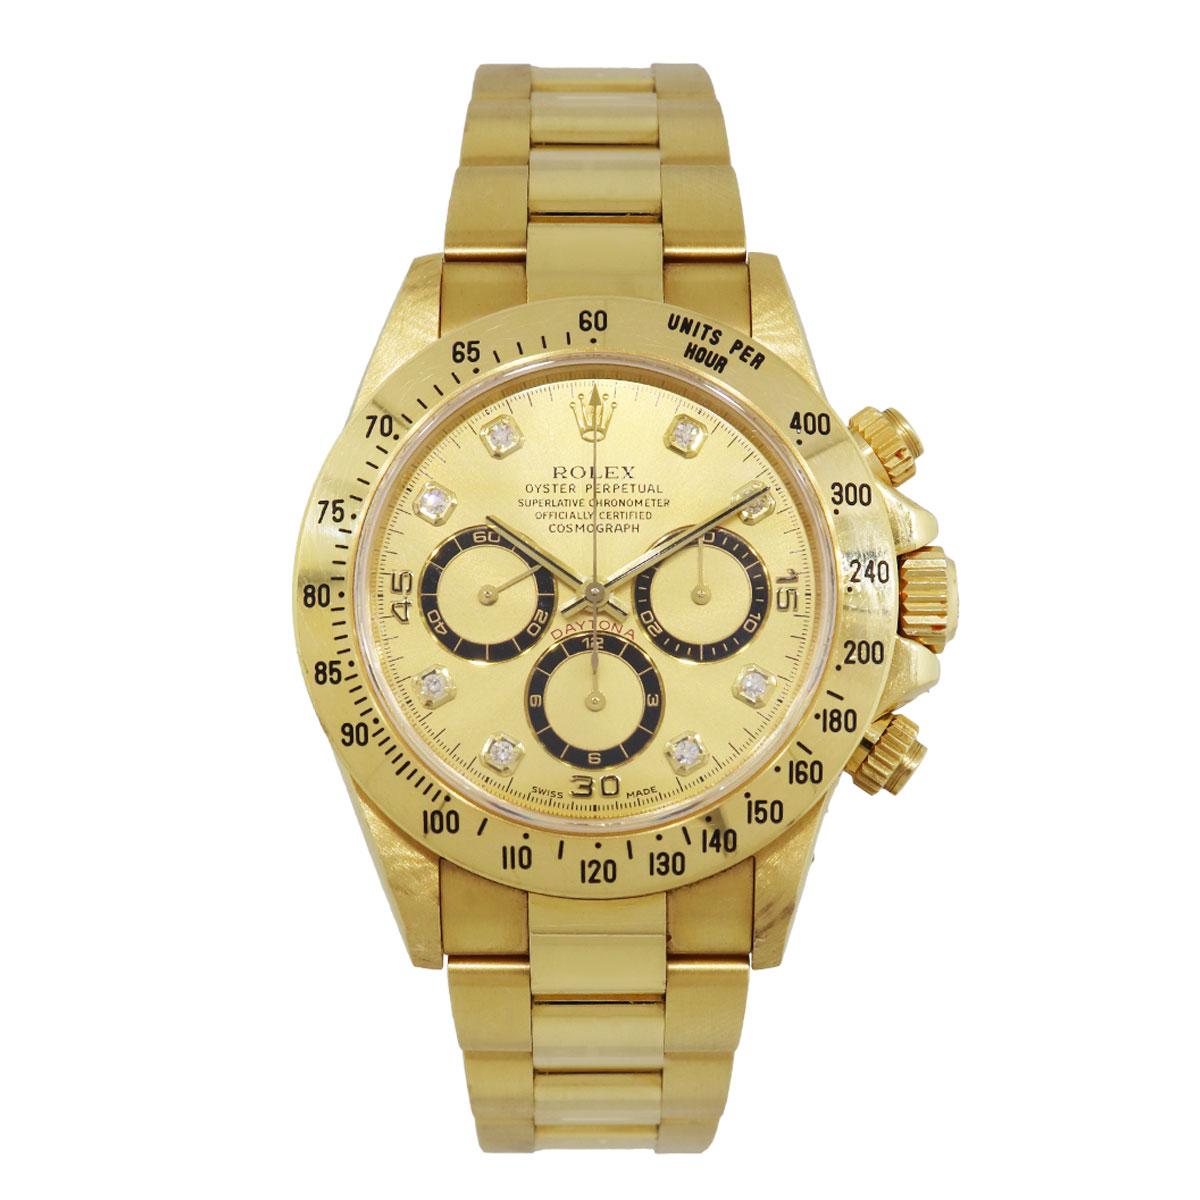 Brand: Rolex
MPN: 16528
Model: Daytona
Case Material: 18k yellow gold
Case Diameter: 40mm
Crystal: Sapphire crystal (scratch resistant)
Bezel: 18k yellow gold bezel
Dial: Champagne diamond serti dial
Bracelet: 18k yellow gold oyster band
Size: Will